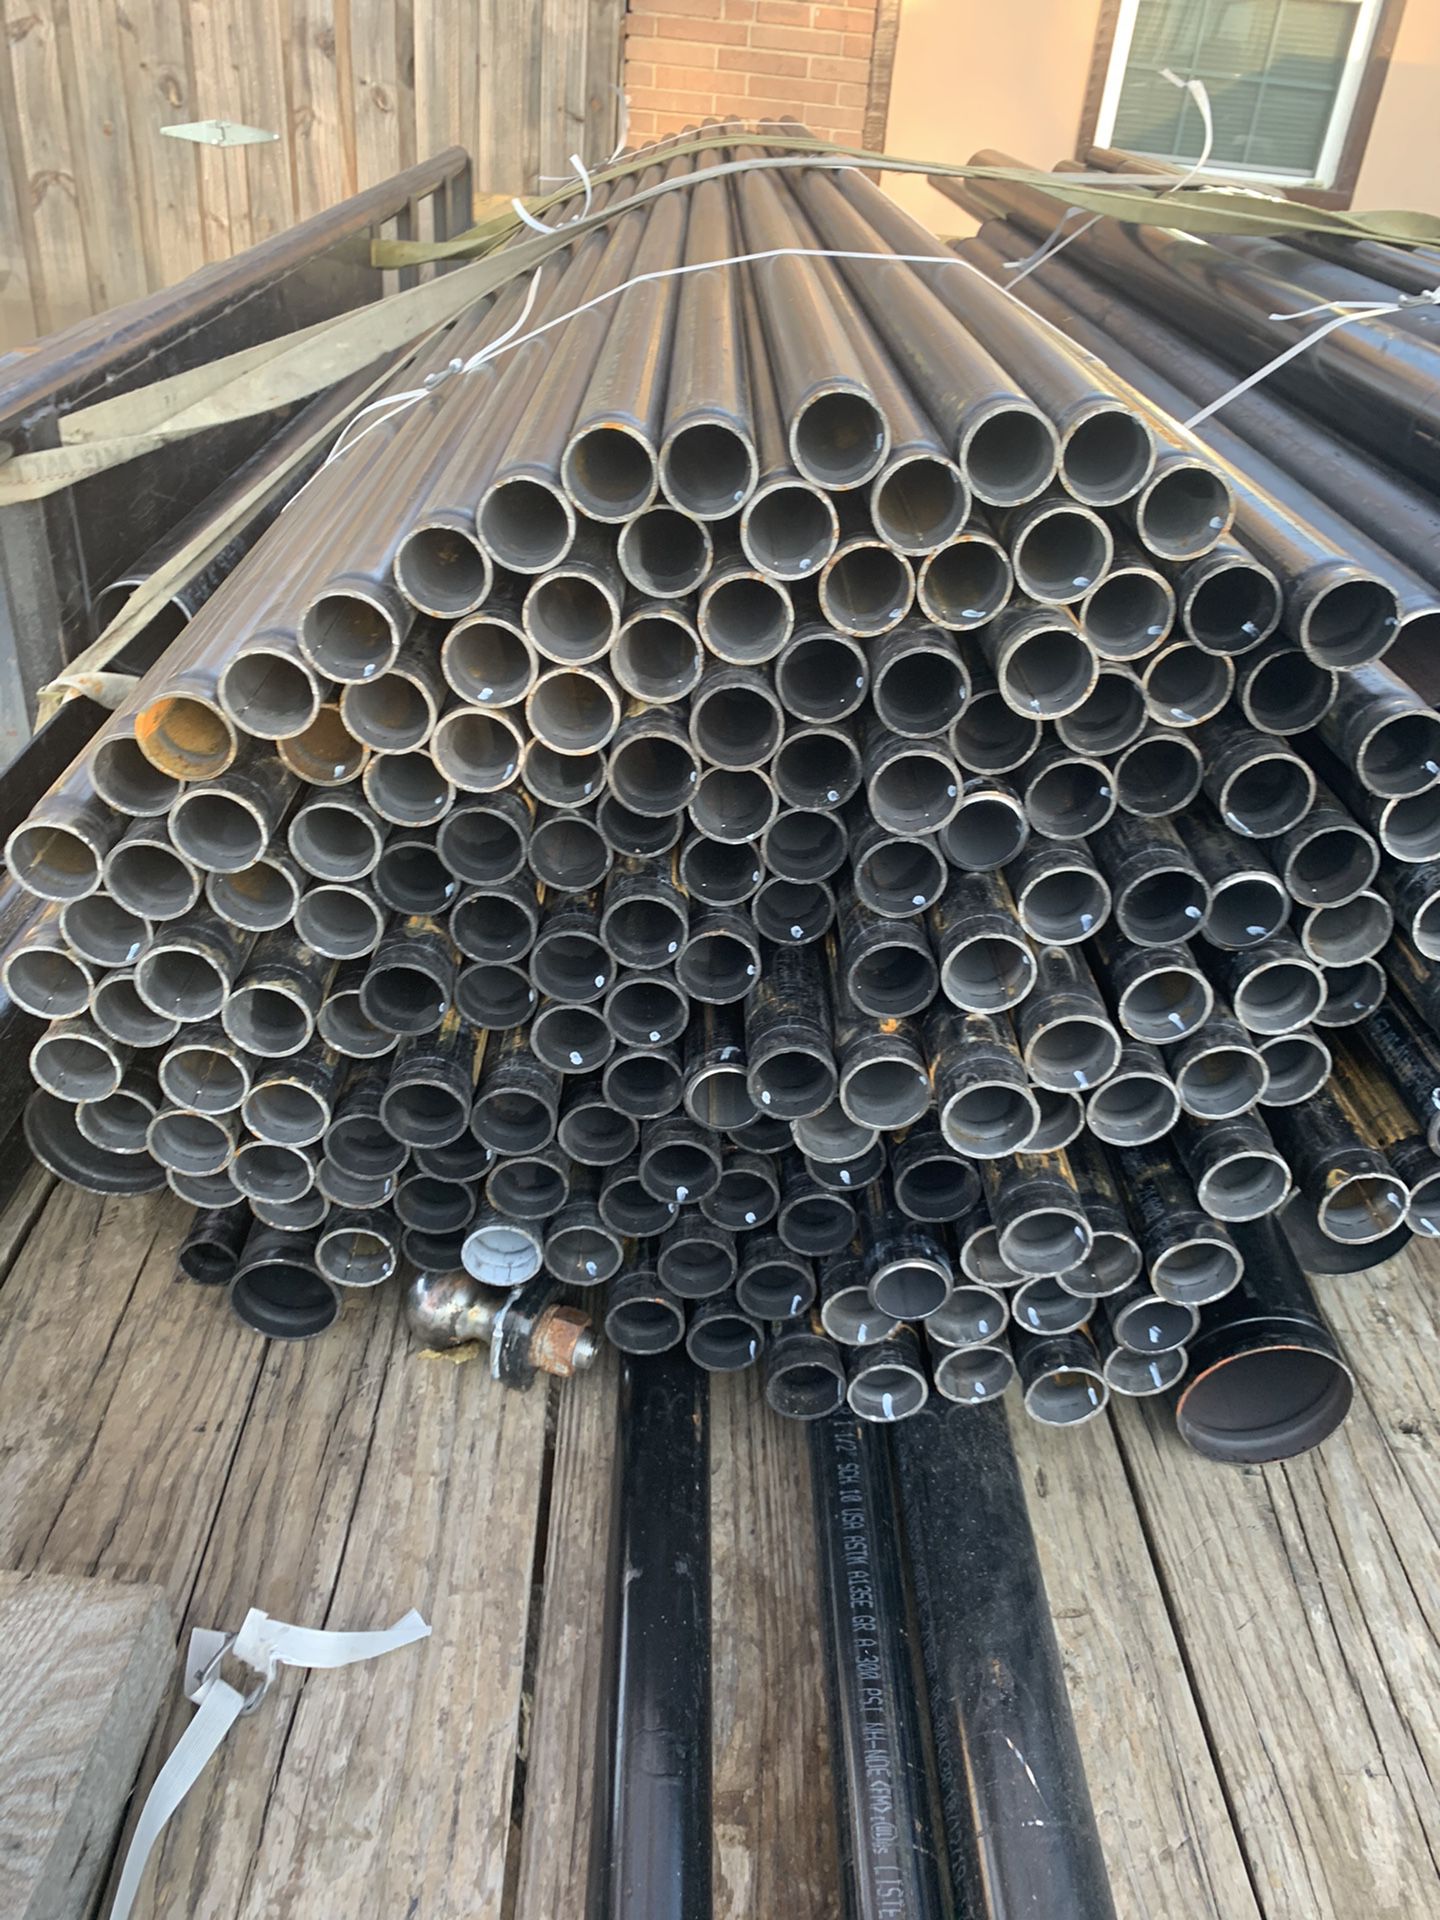 1-7/8” pipe X 10 Feet Long Fence Posts (New and Clean Black Steel PiPe )